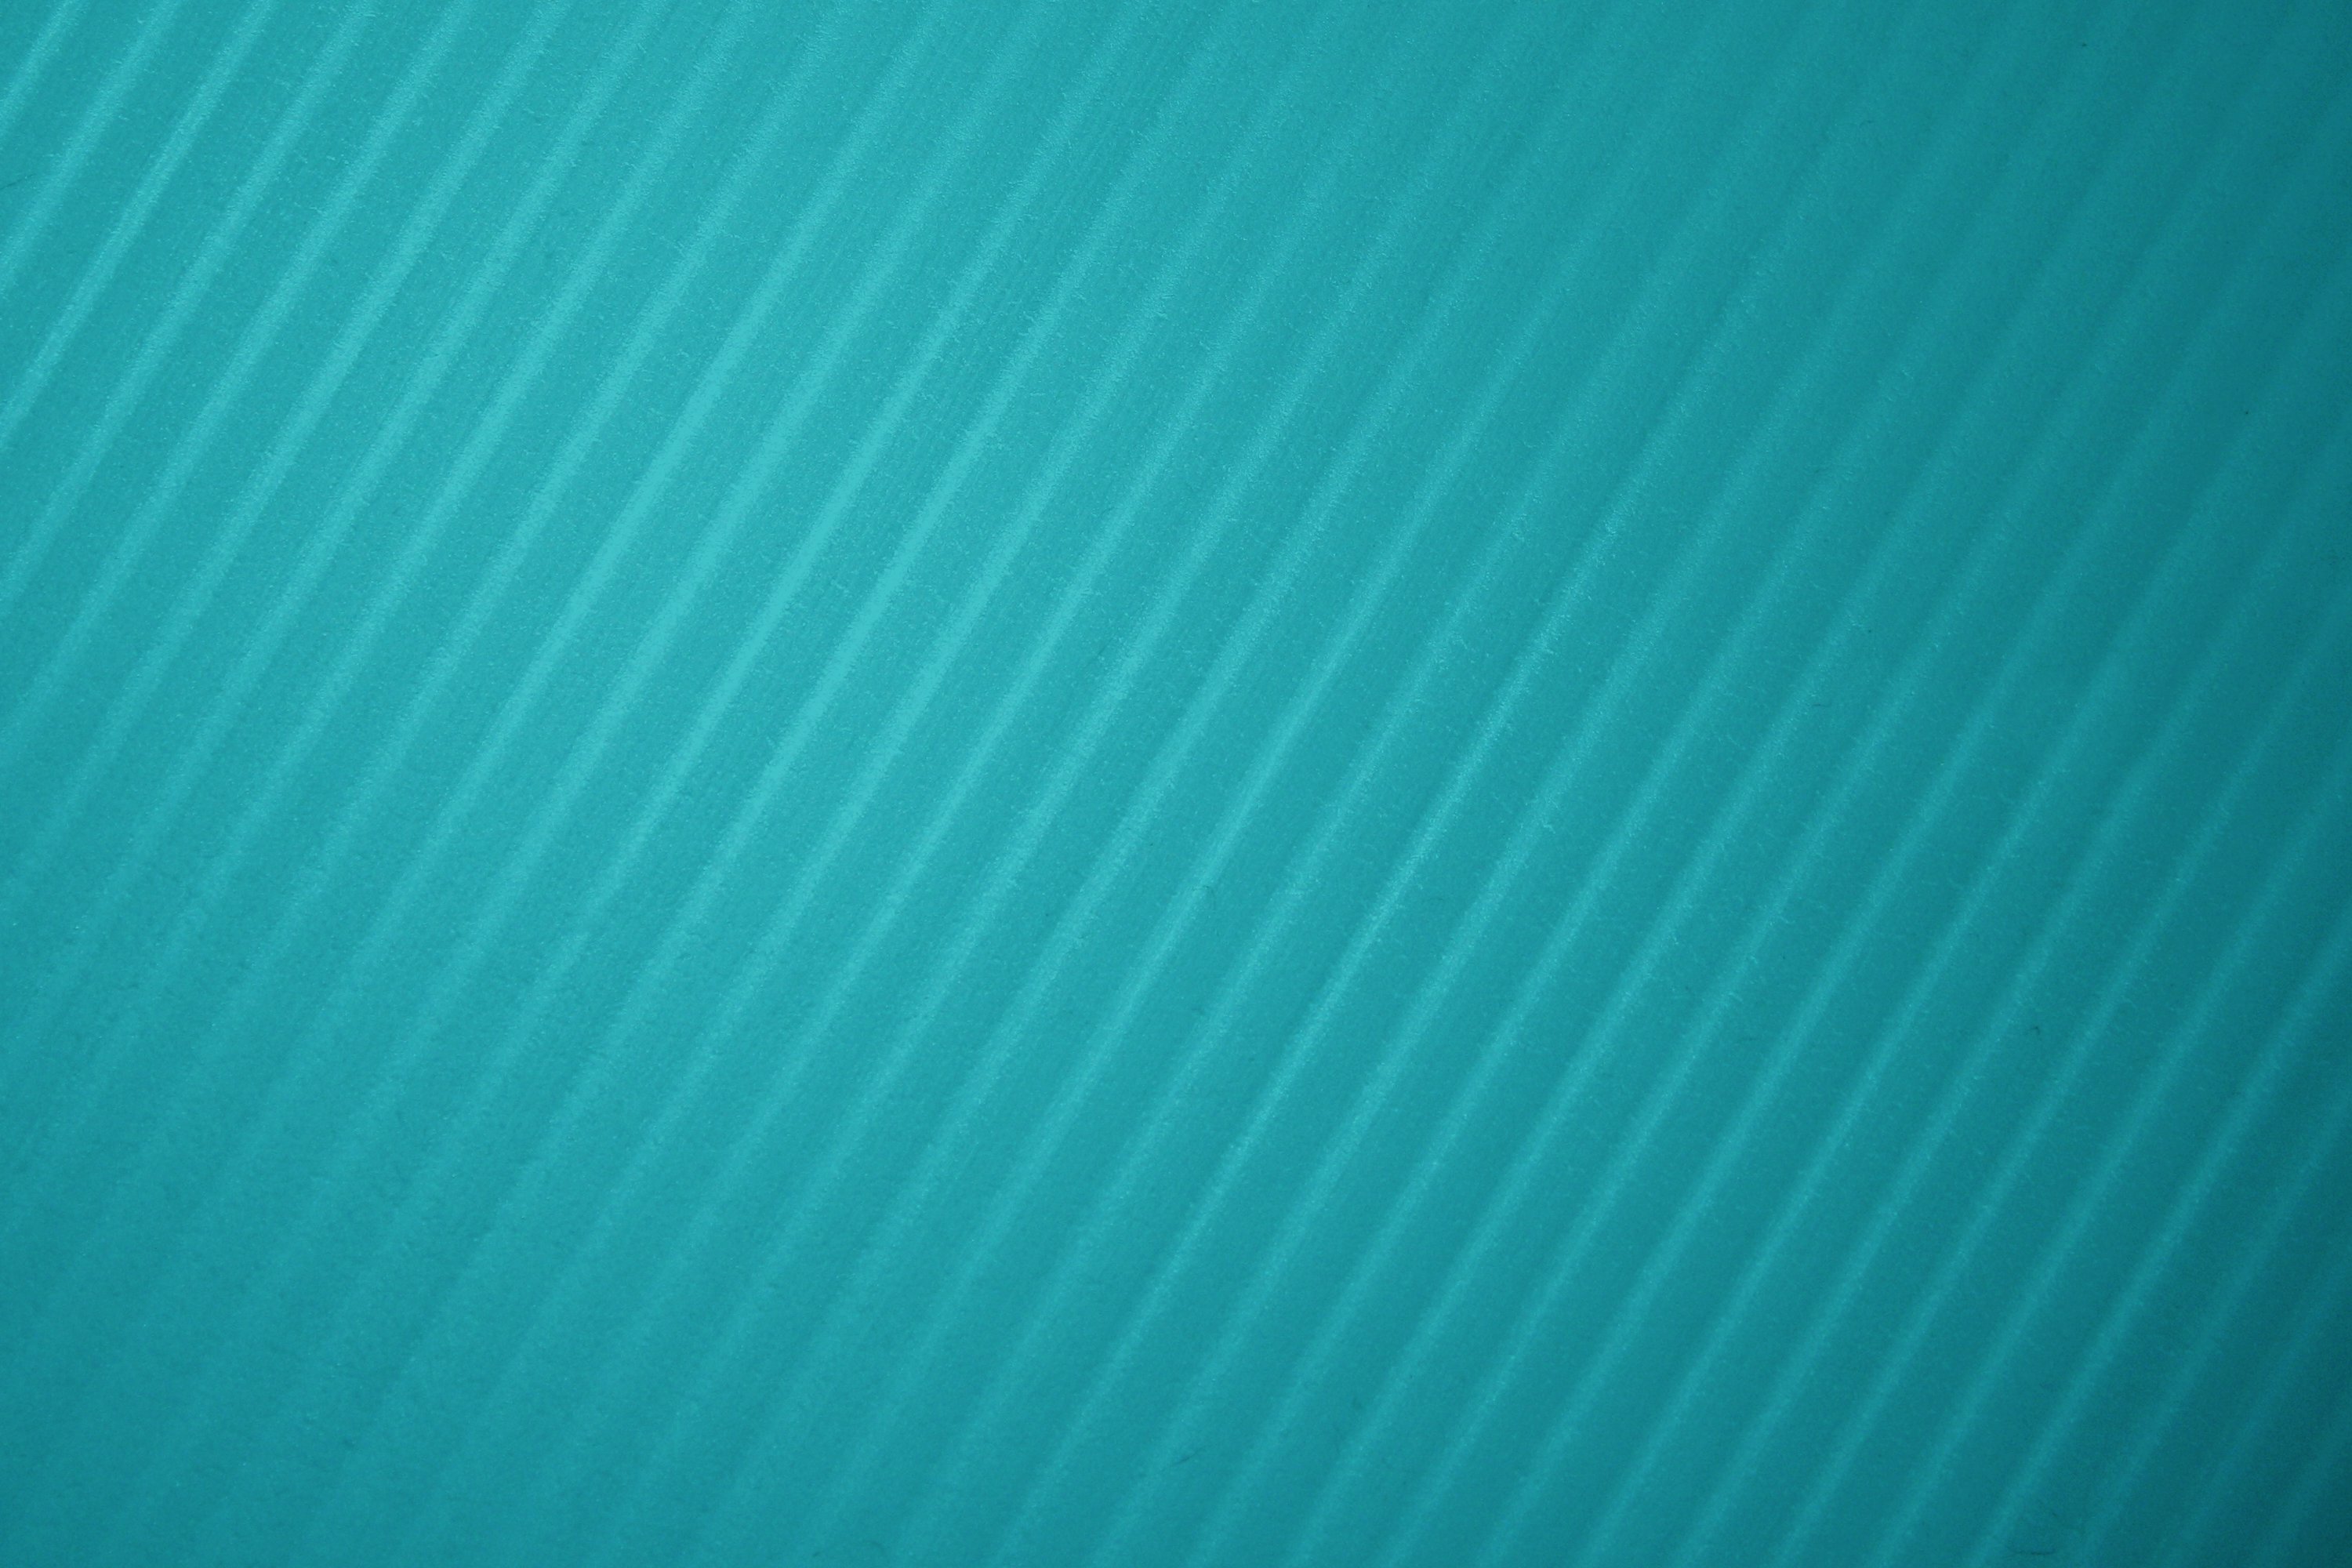 Teal Diagonal Striped Plastic Texture Picture Free Photograph